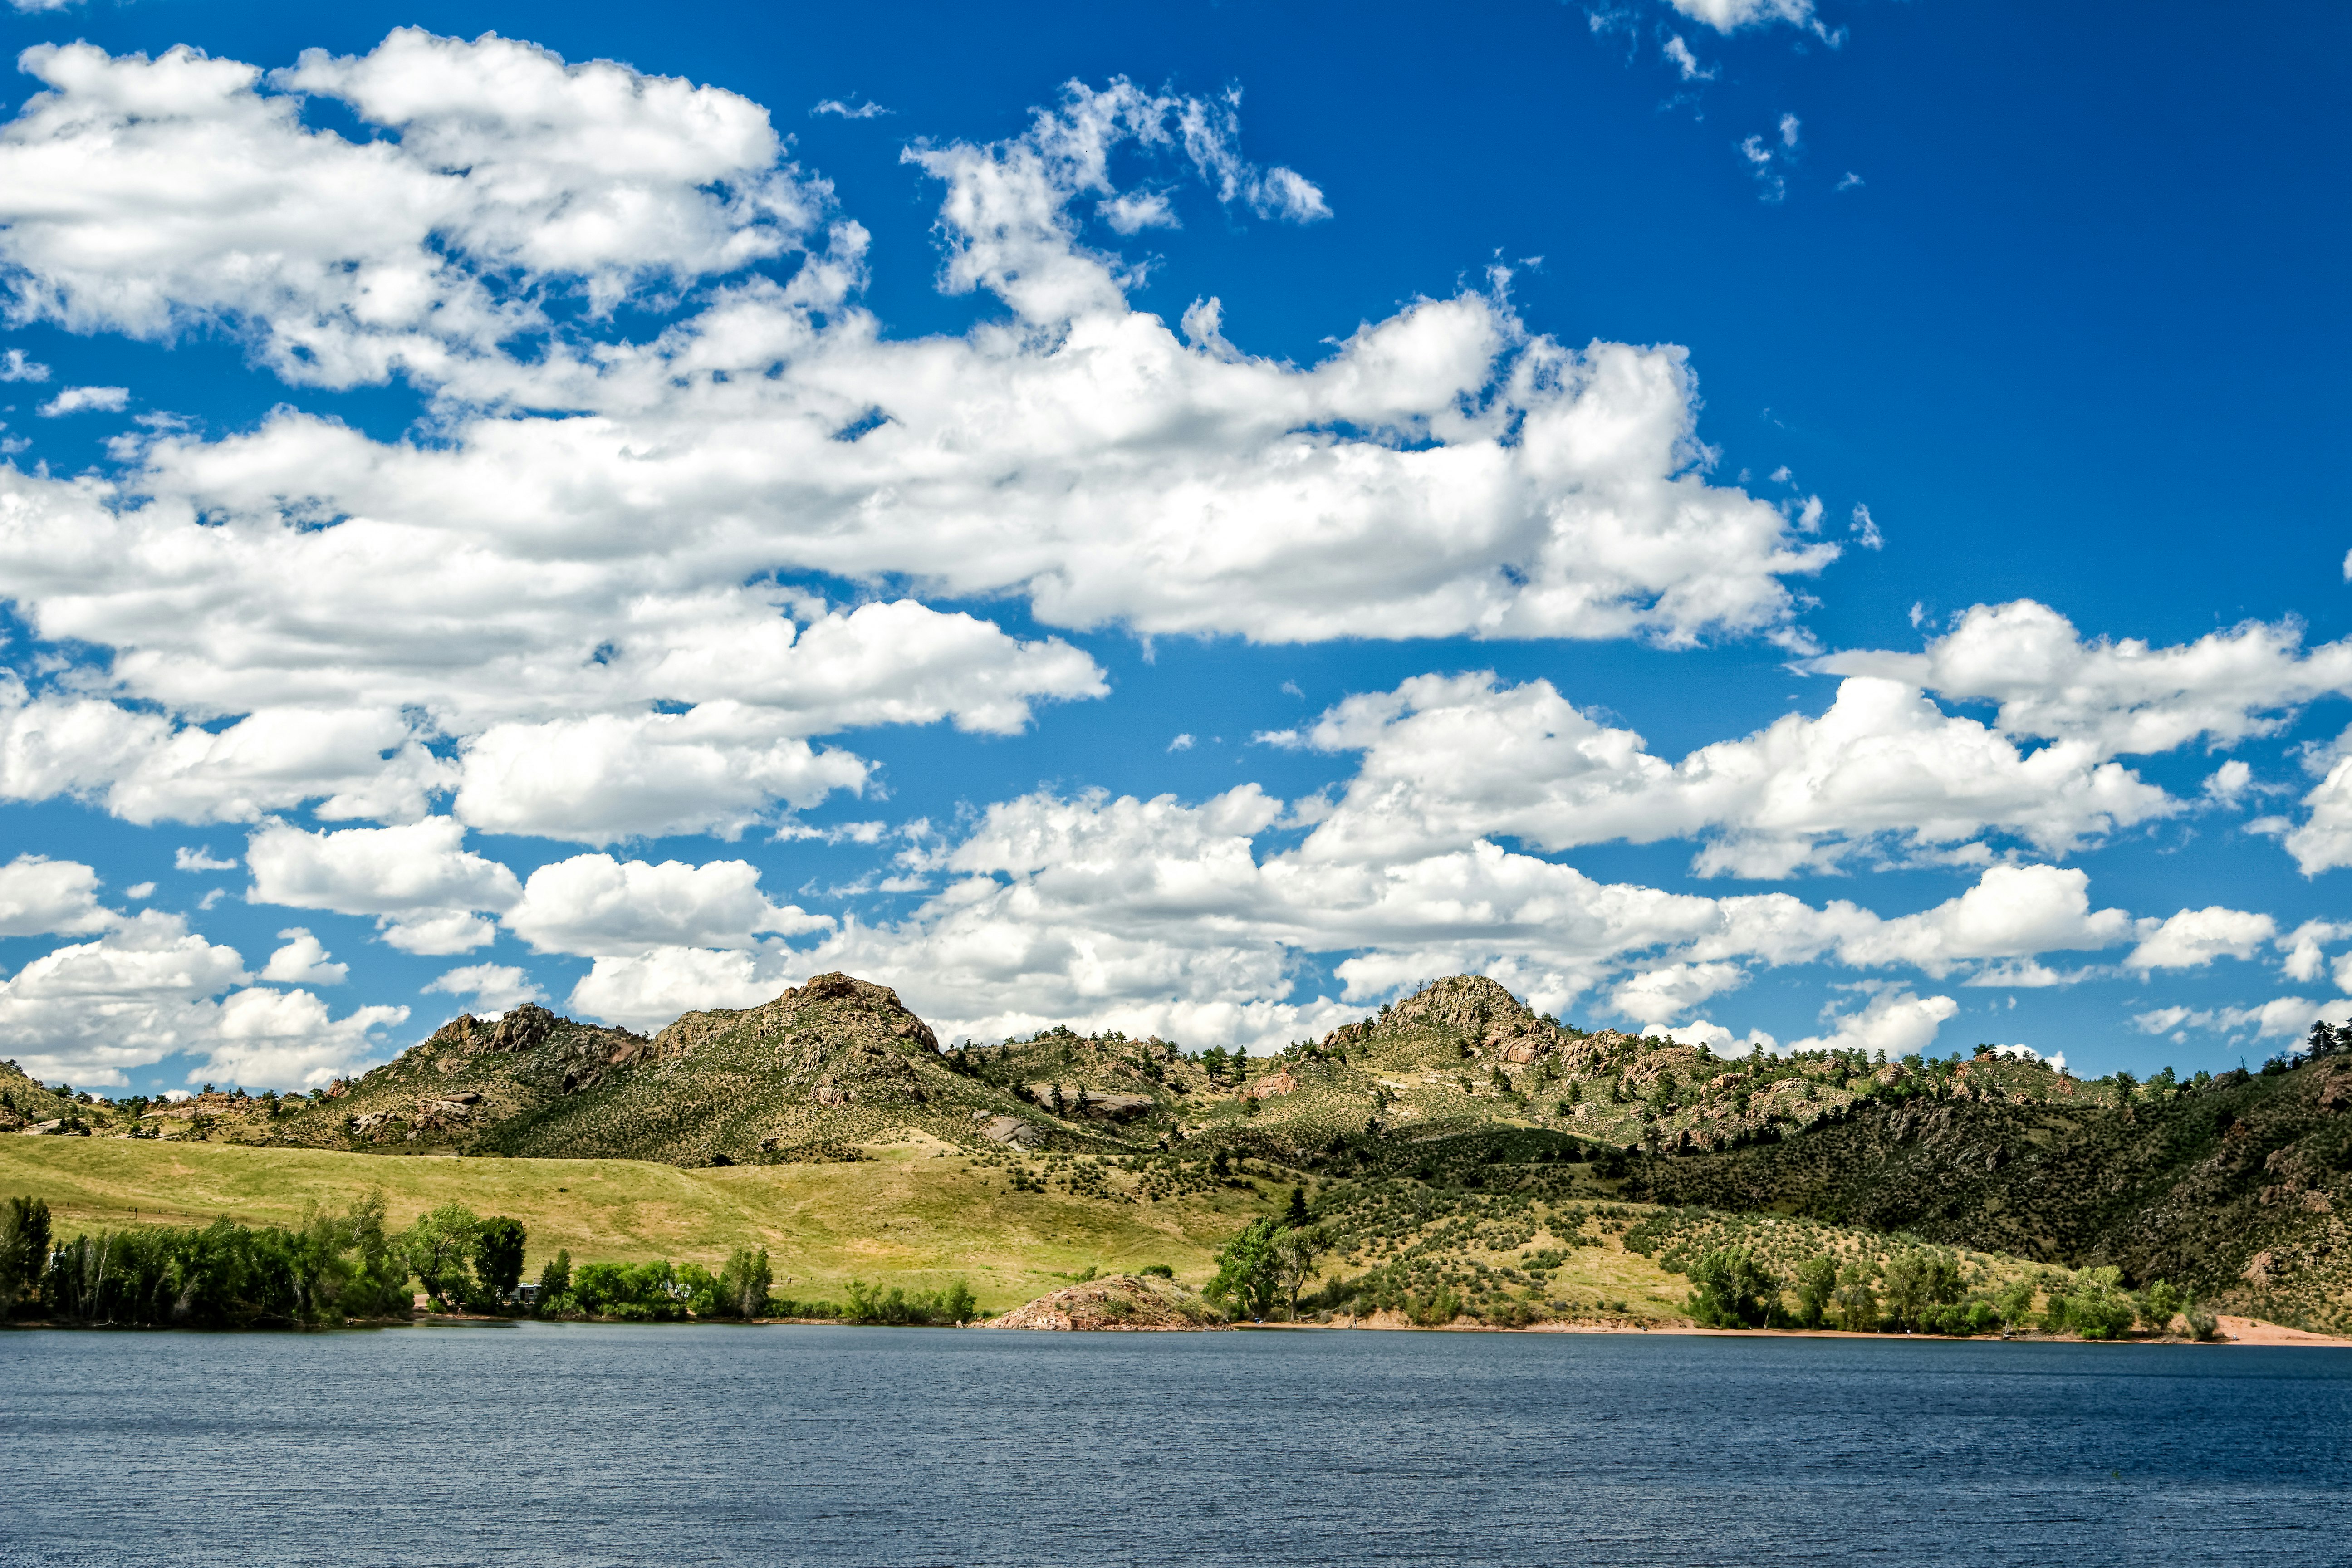 Crystal Lake glitters in the sun against a grassy series of hills at Curt Gowdy Park, Wyoming